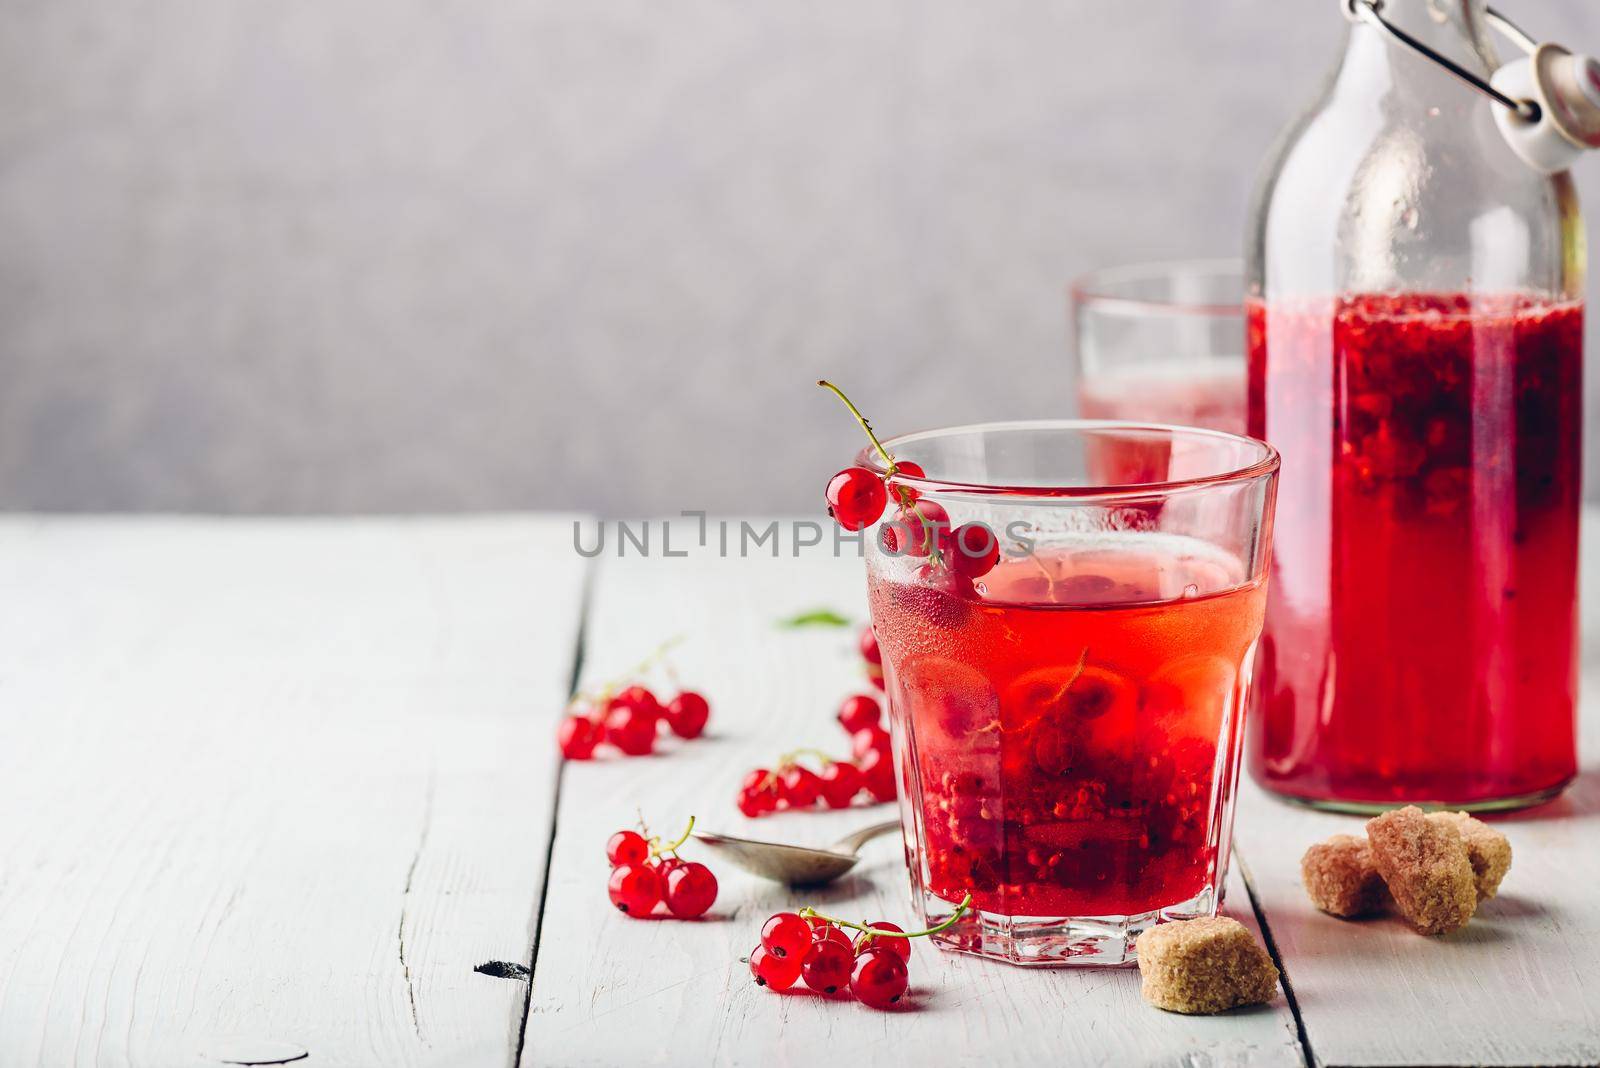 Infused water with fresh red currant and cane sugar